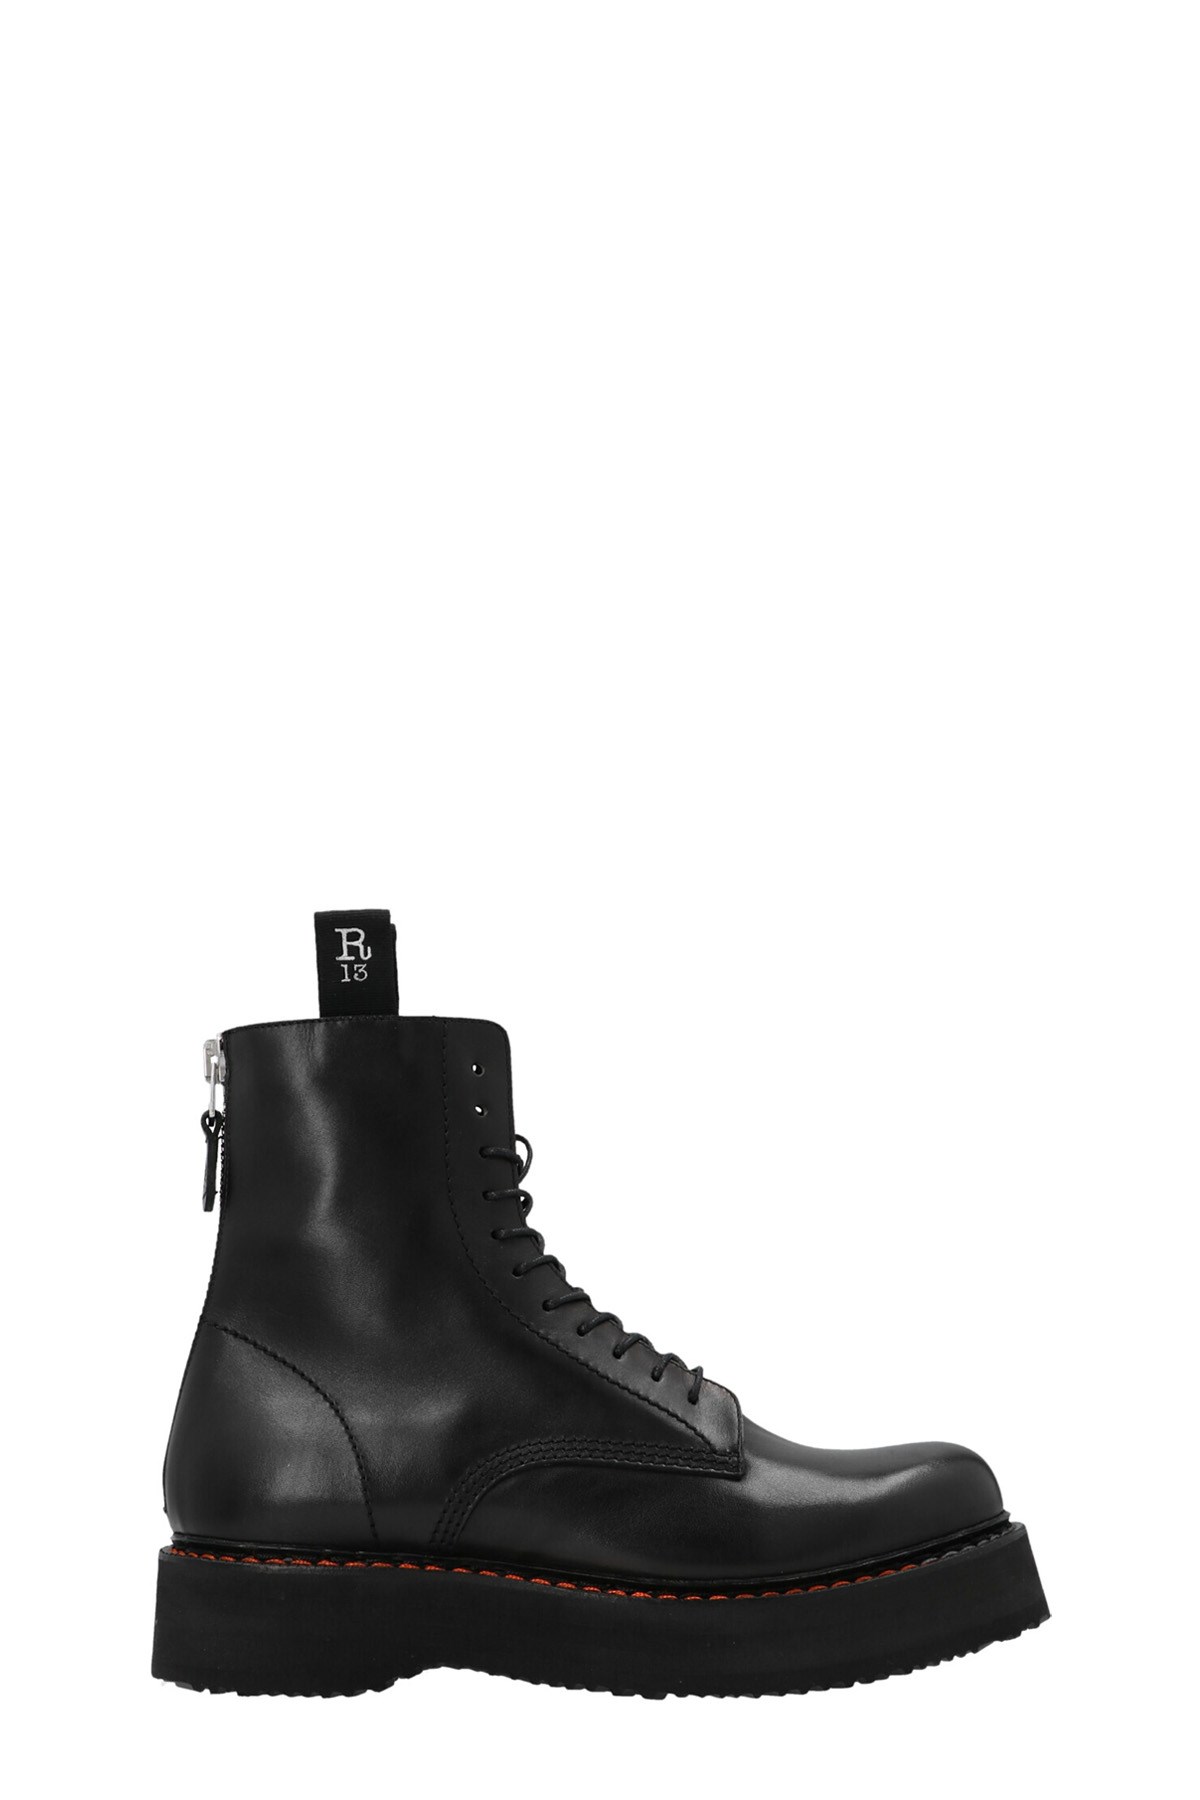 R13 'Single Stacked’ Combat Boots